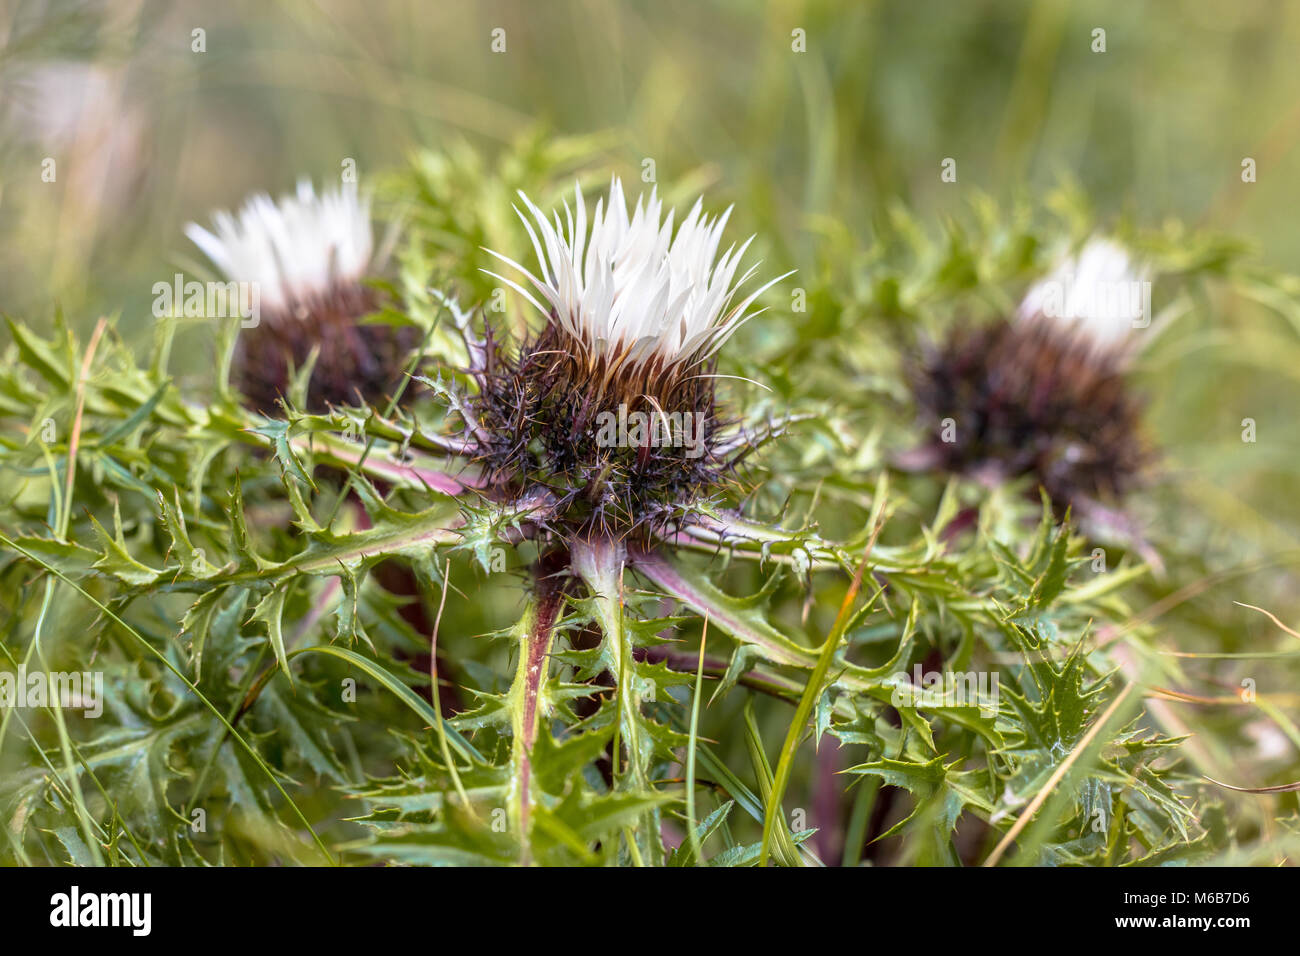 Stemless carline thistle (Carlina Acaulis) or silver thistle flowers Stock Photo